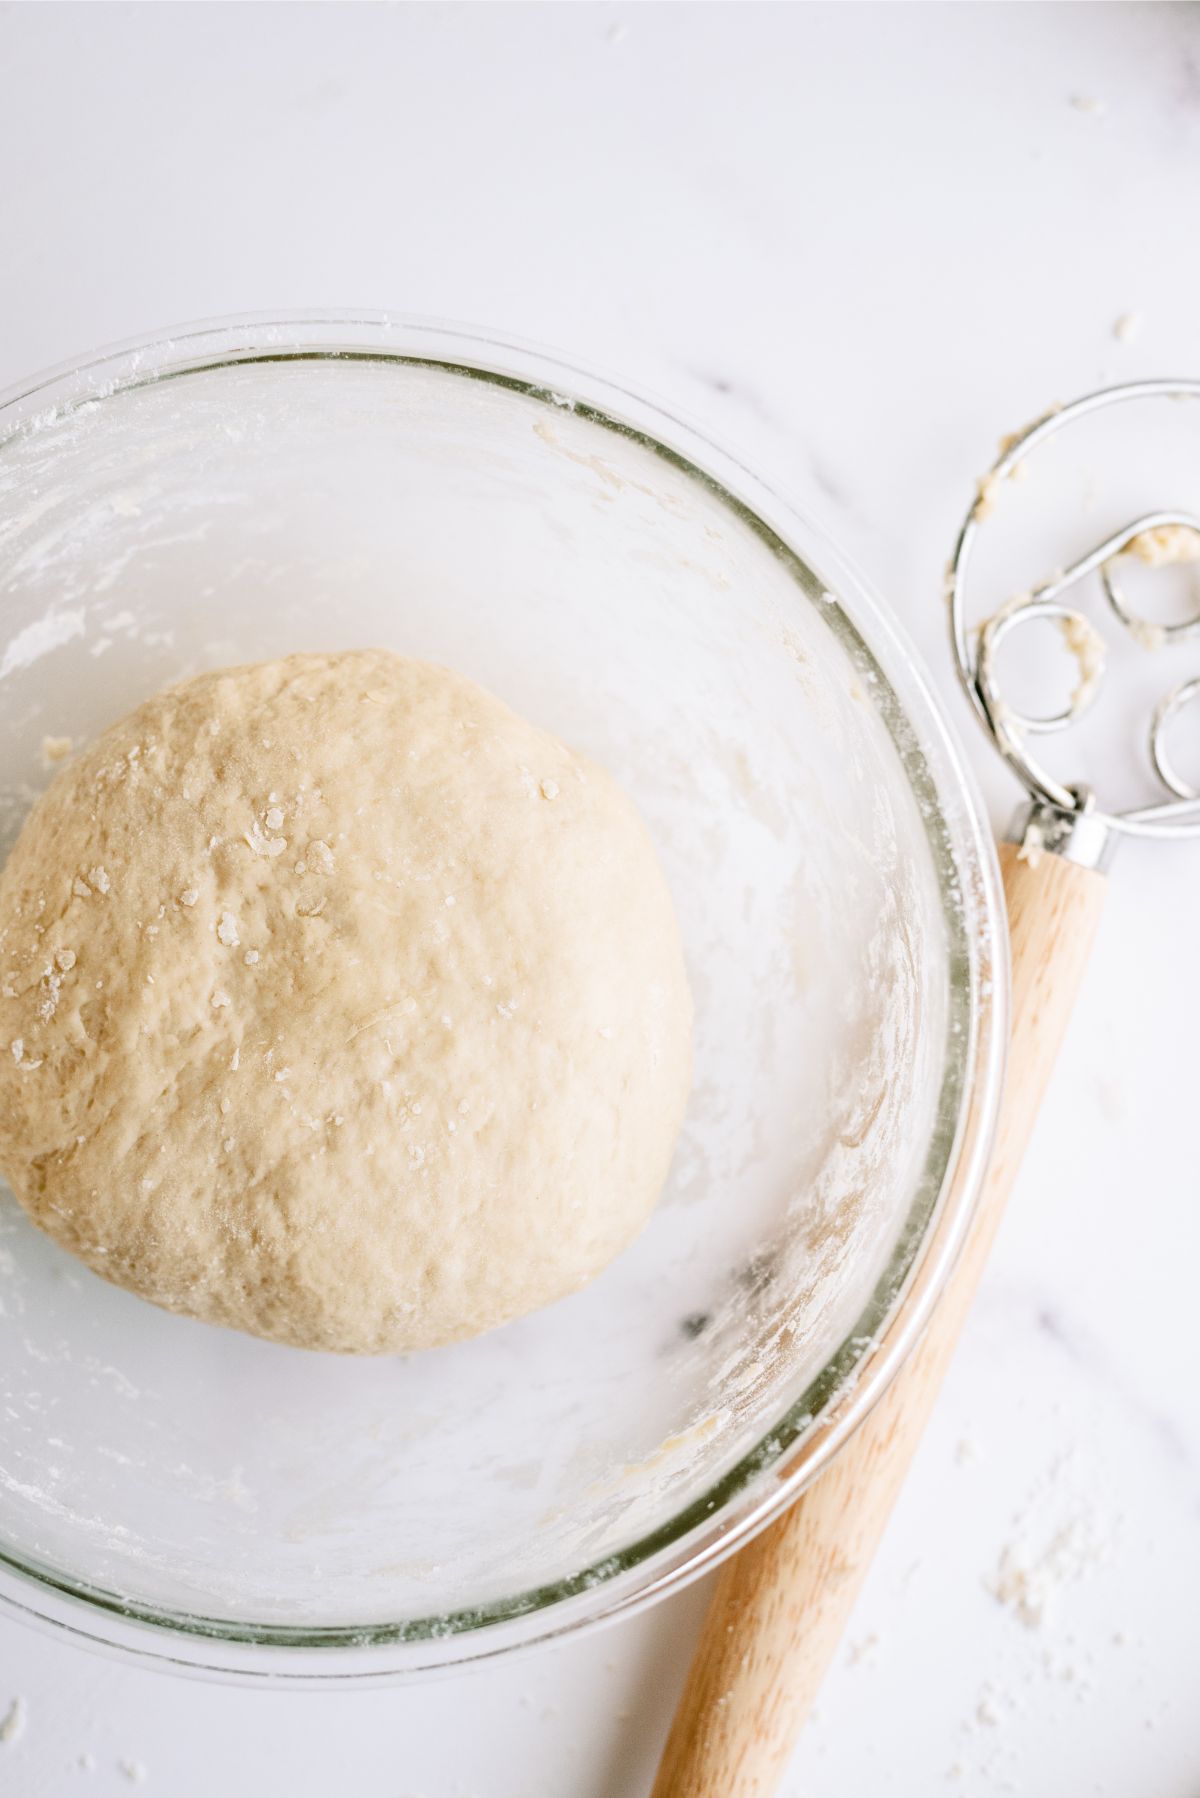 Bread dough rising in a glass mixing bowl